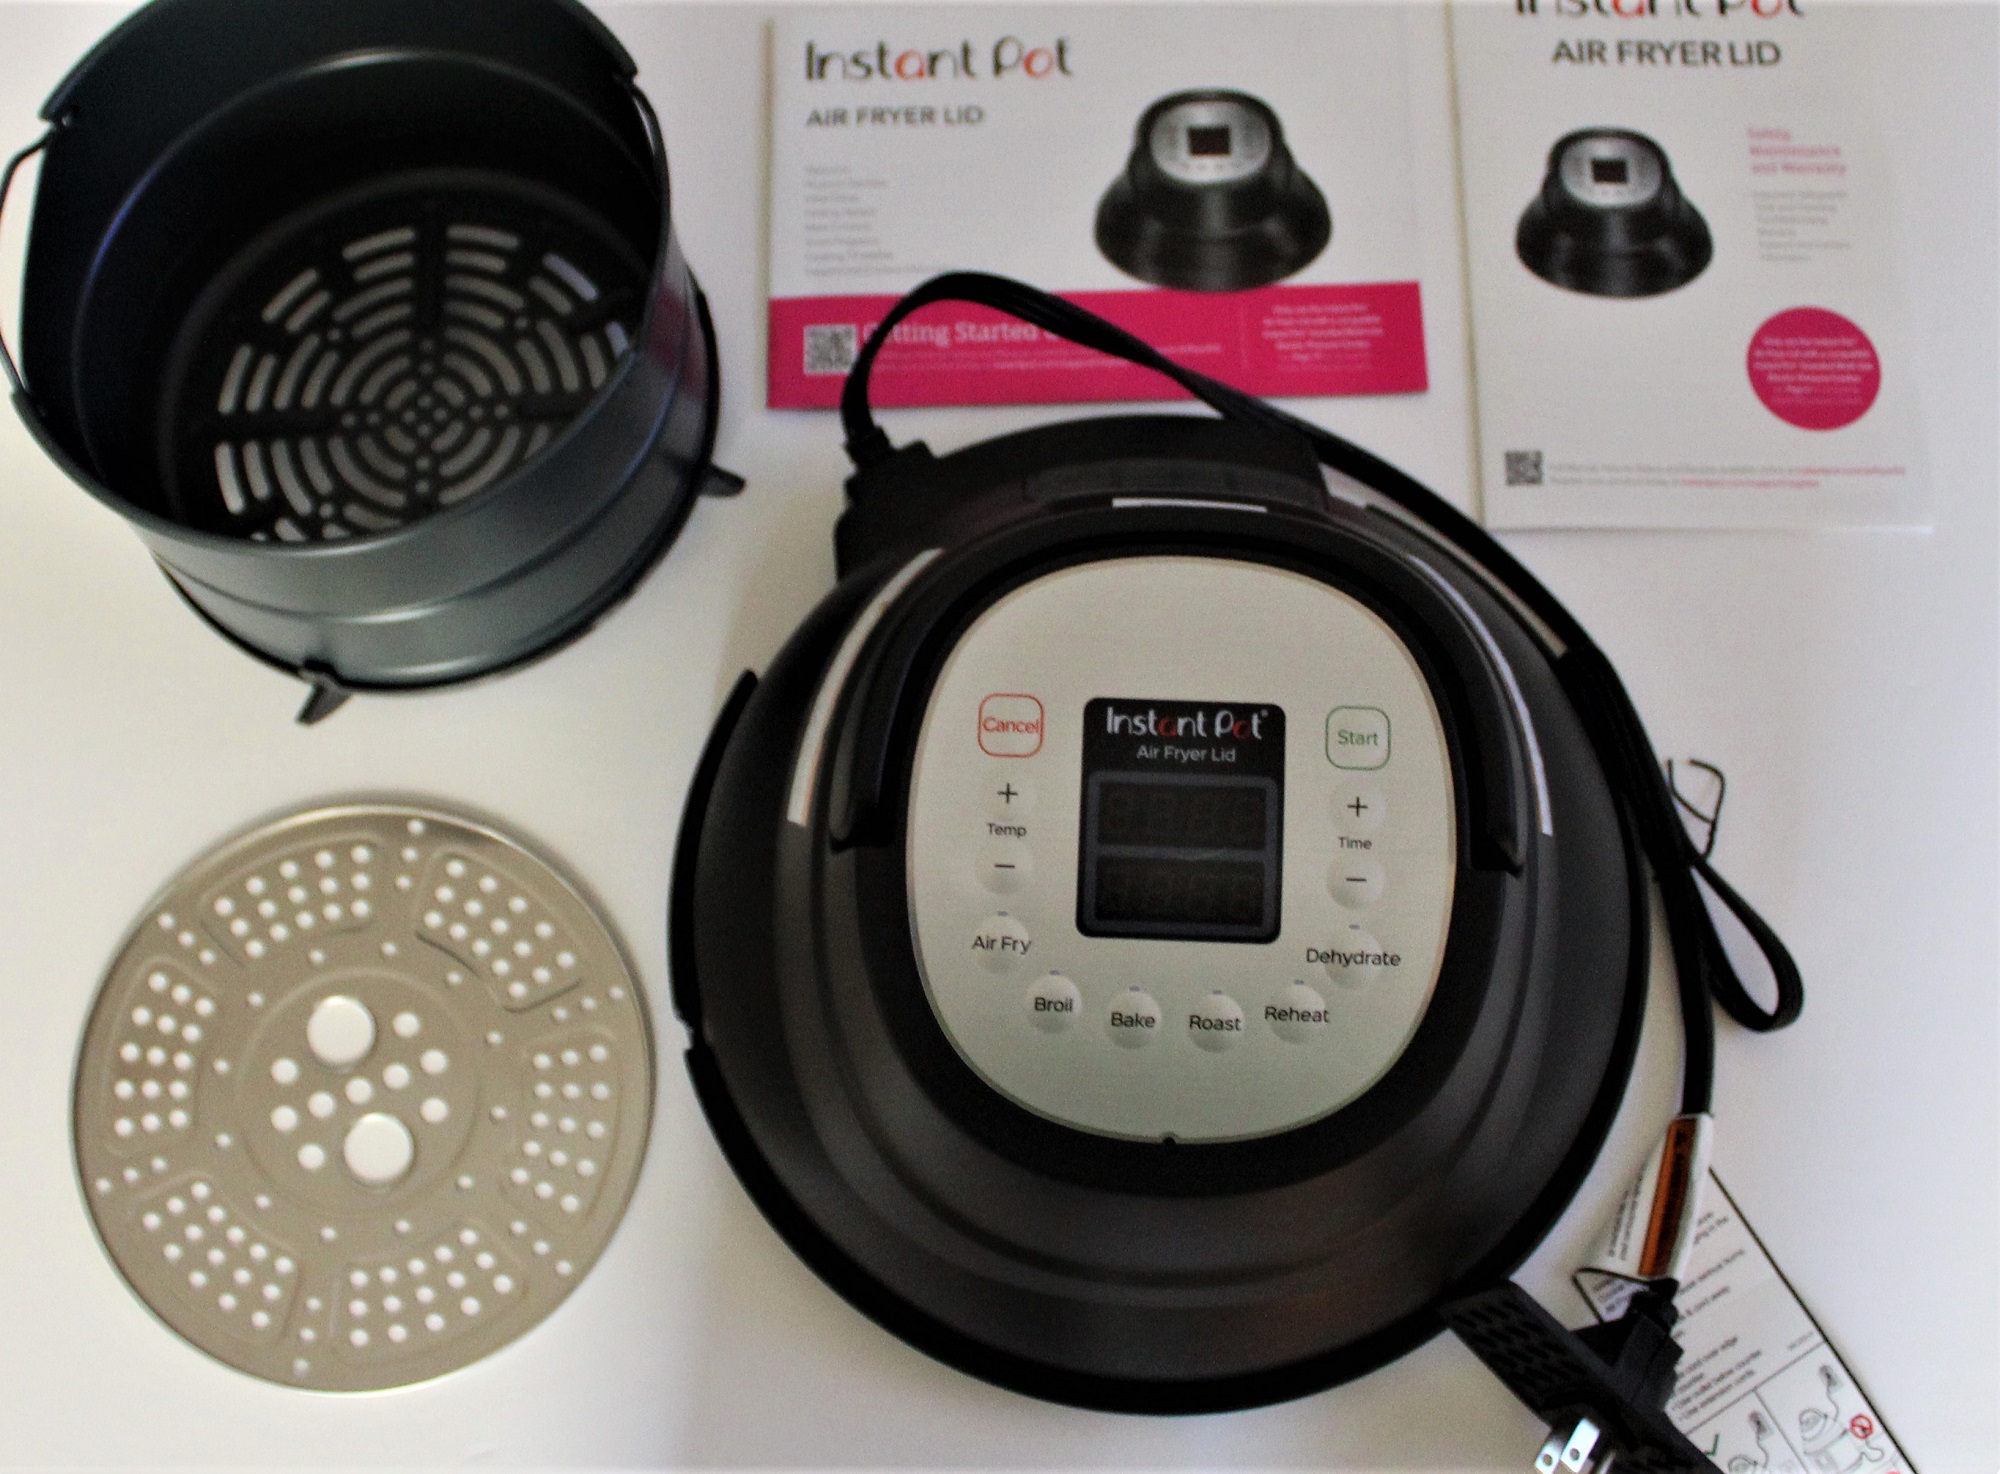 What is the Instant Pot Air Fryer Lid?